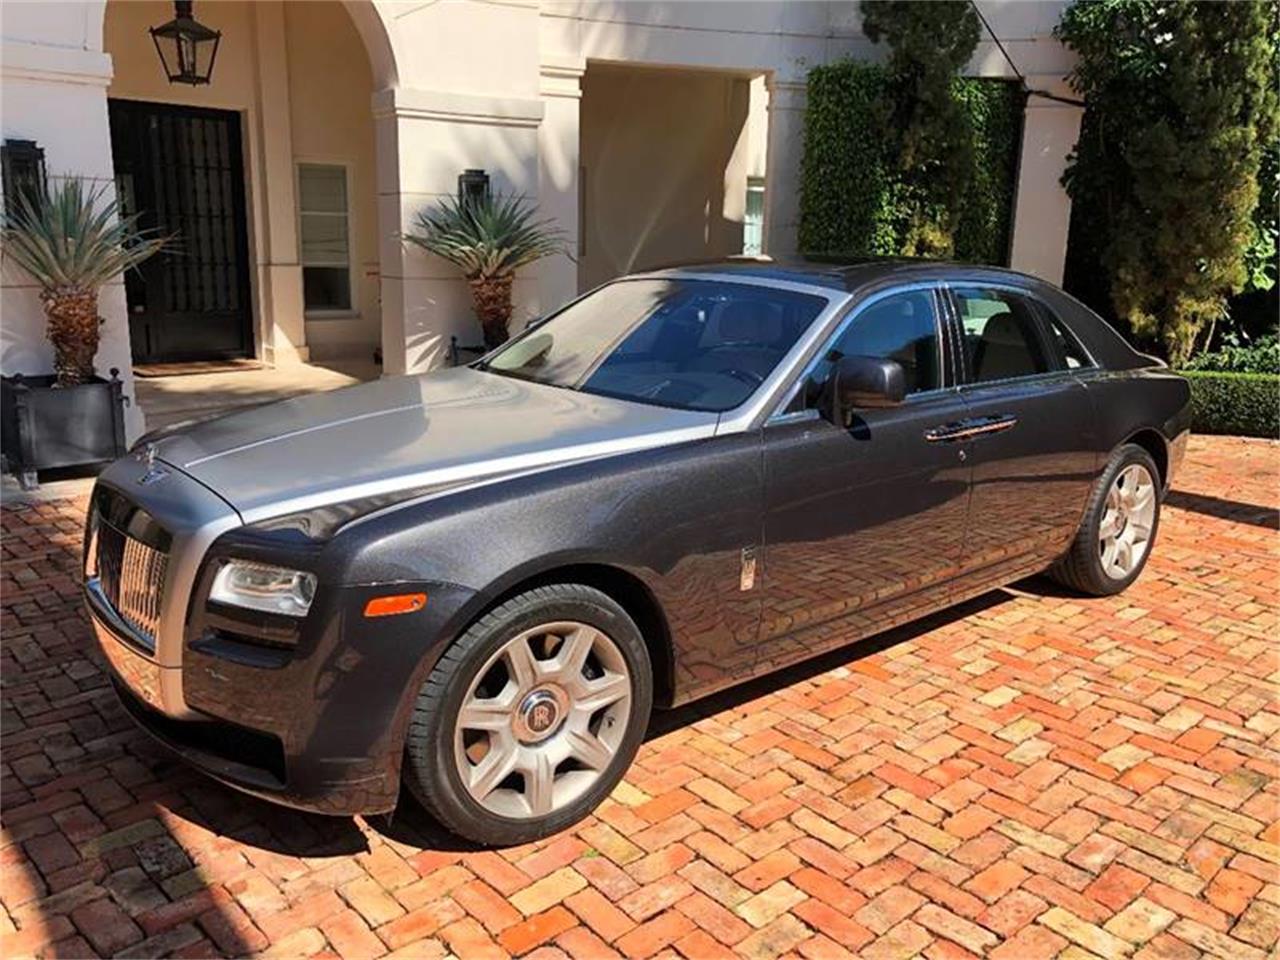 2012 Rolls-Royce Silver Ghost for Sale | ClassicCars.com | CC-1188134